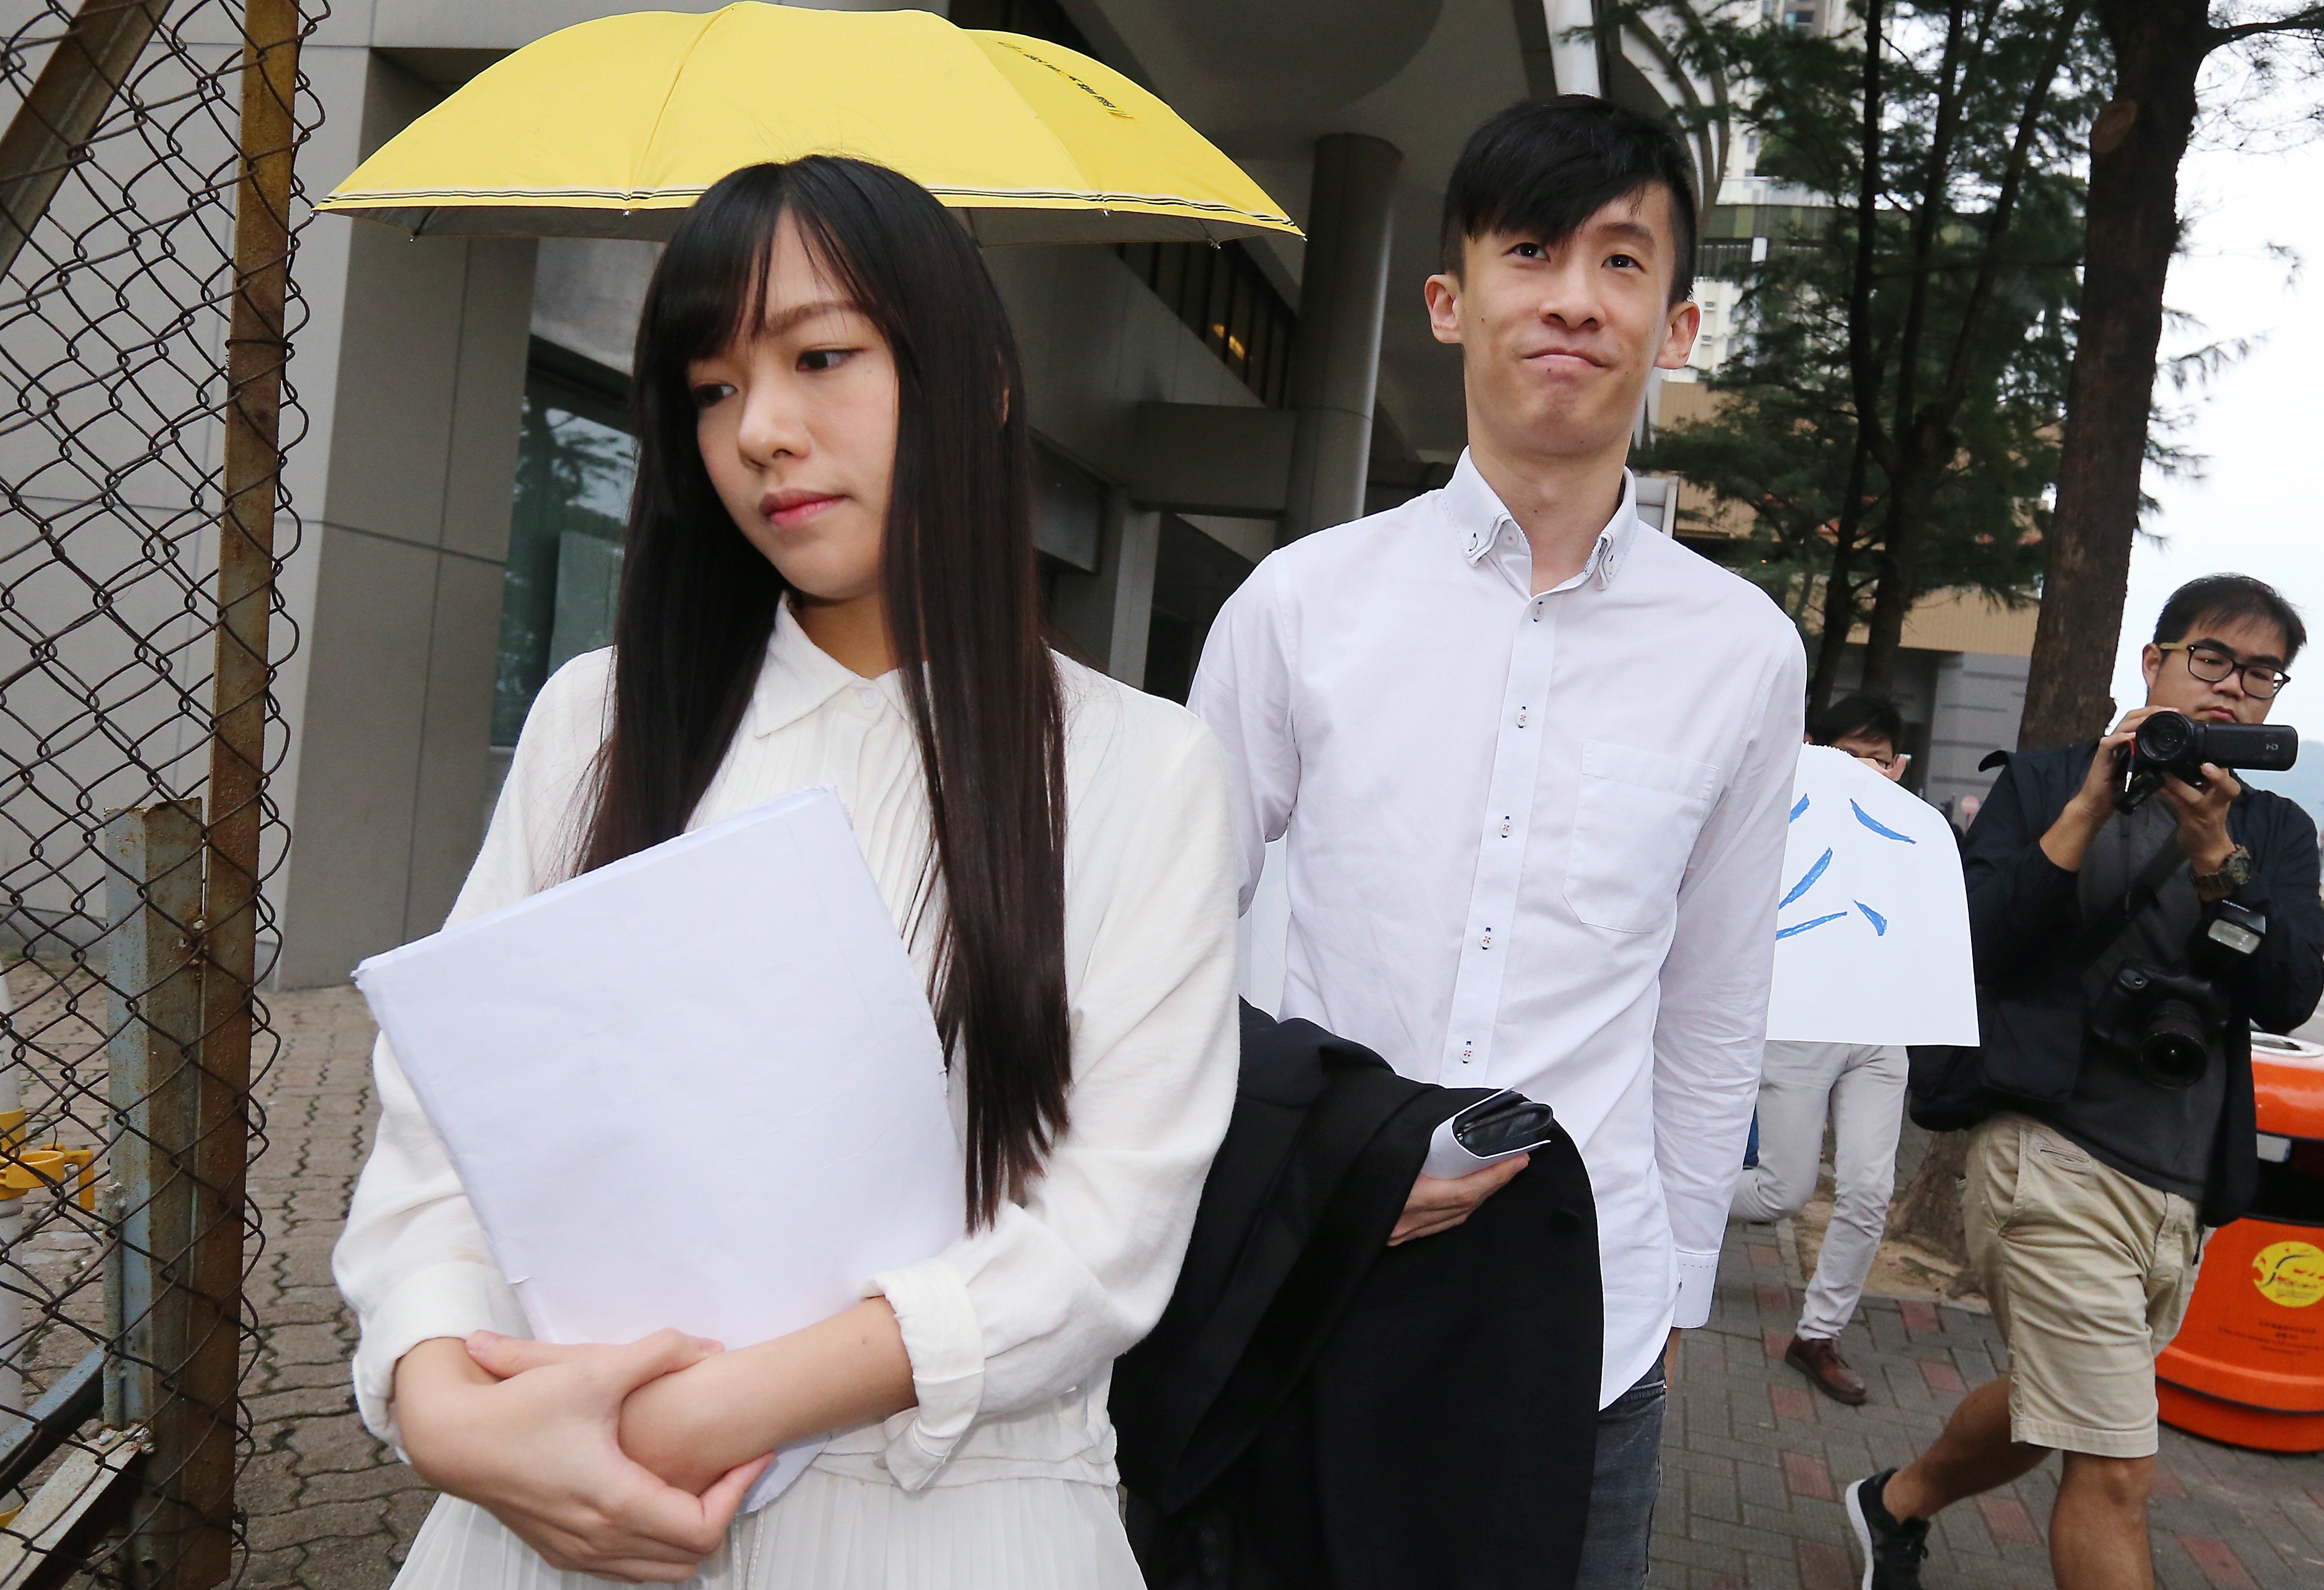 Yau Wai-ching and Baggio Leung leave Eastern Court after the hearing. Photo: Dickson Lee